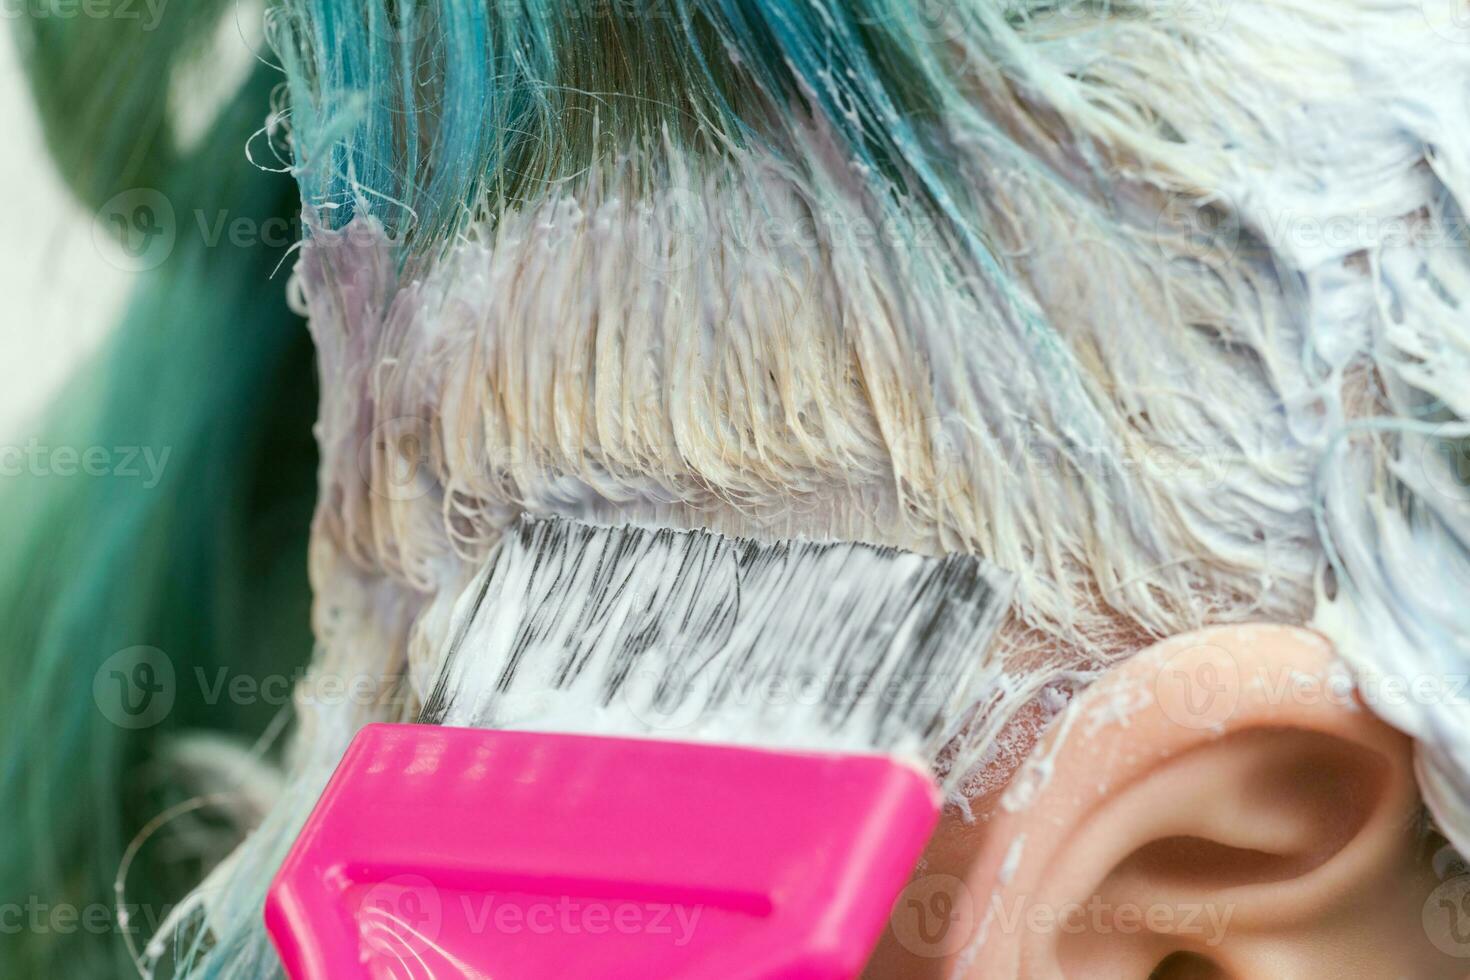 Hairdresser using pink brush while applying paint to female customer with emerald hair color during process of bleaching hair roots photo